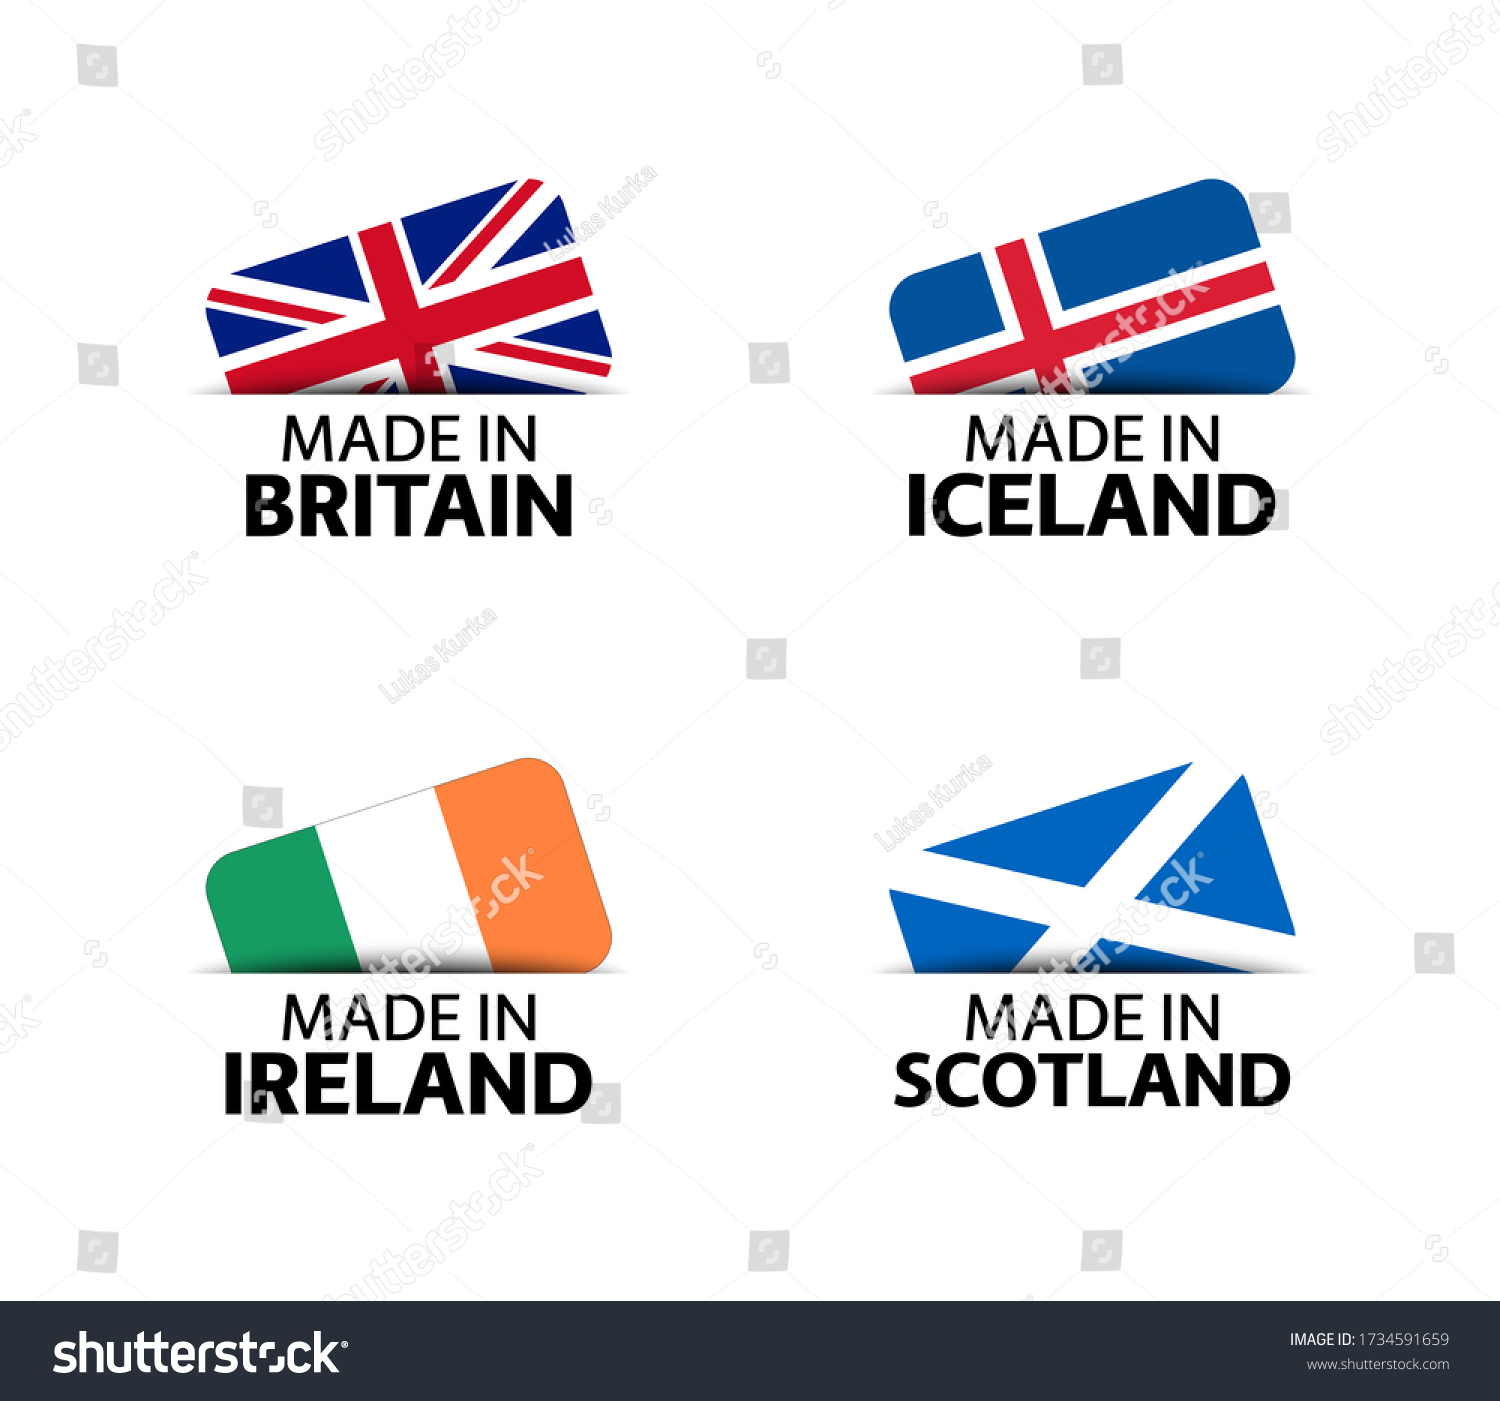 SVG of Set of four British, Icelandic, Irish and Scottish stickers. Made in Britain, Made in Iceland, Made in Ireland and Made in Scotland. Simple icons with flags isolated on a white background svg